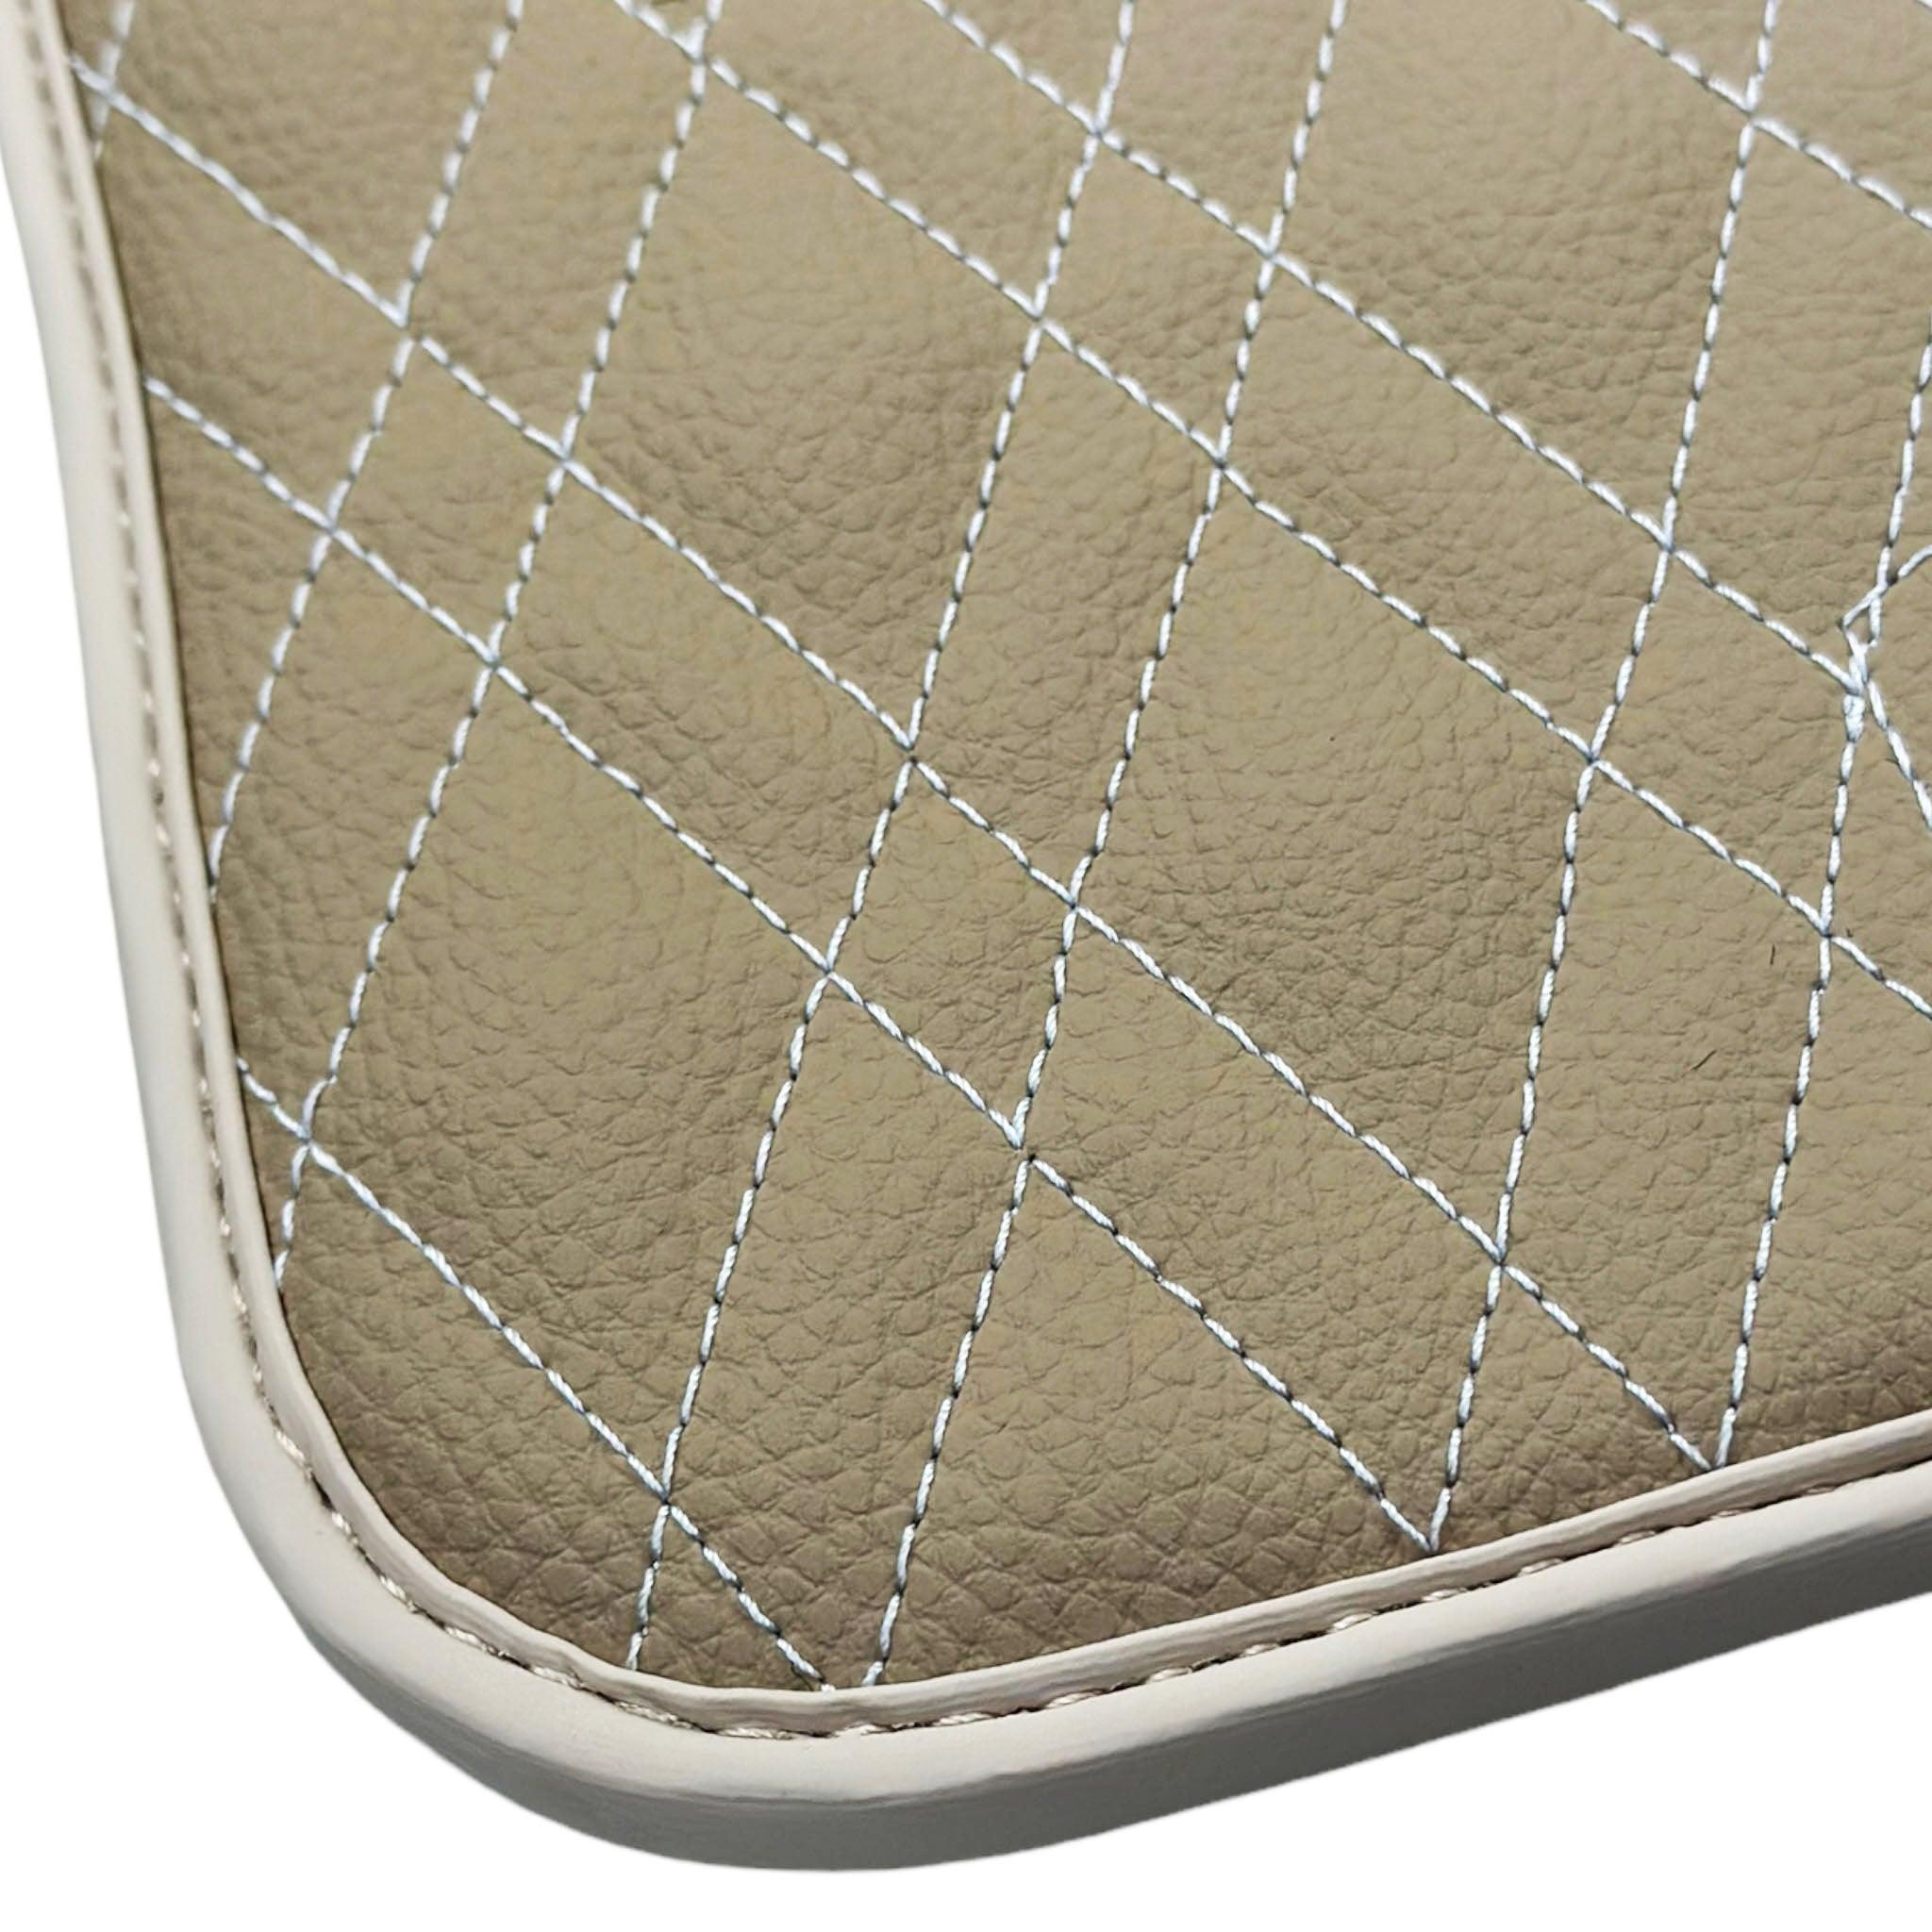 Beige Leather Floor Mats For BMW 7 Series E38 | Fighter Jet Edition